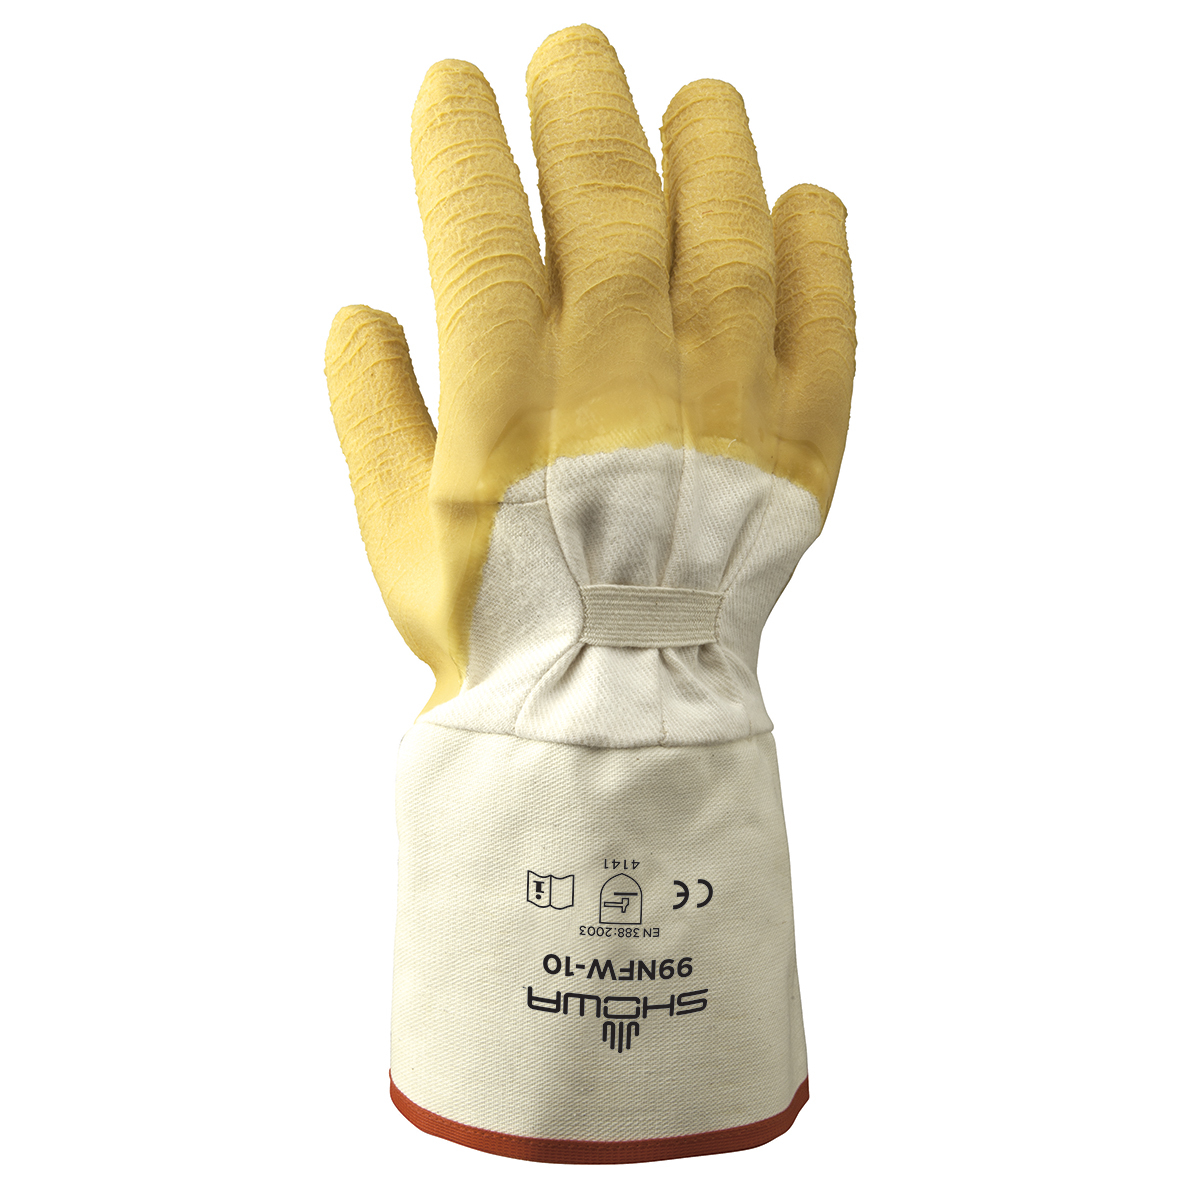 SHOWA® Size 10 Heavy Duty Natural Rubber Palm Coated Work Gloves With Cotton Liner And Gauntlet Cuff